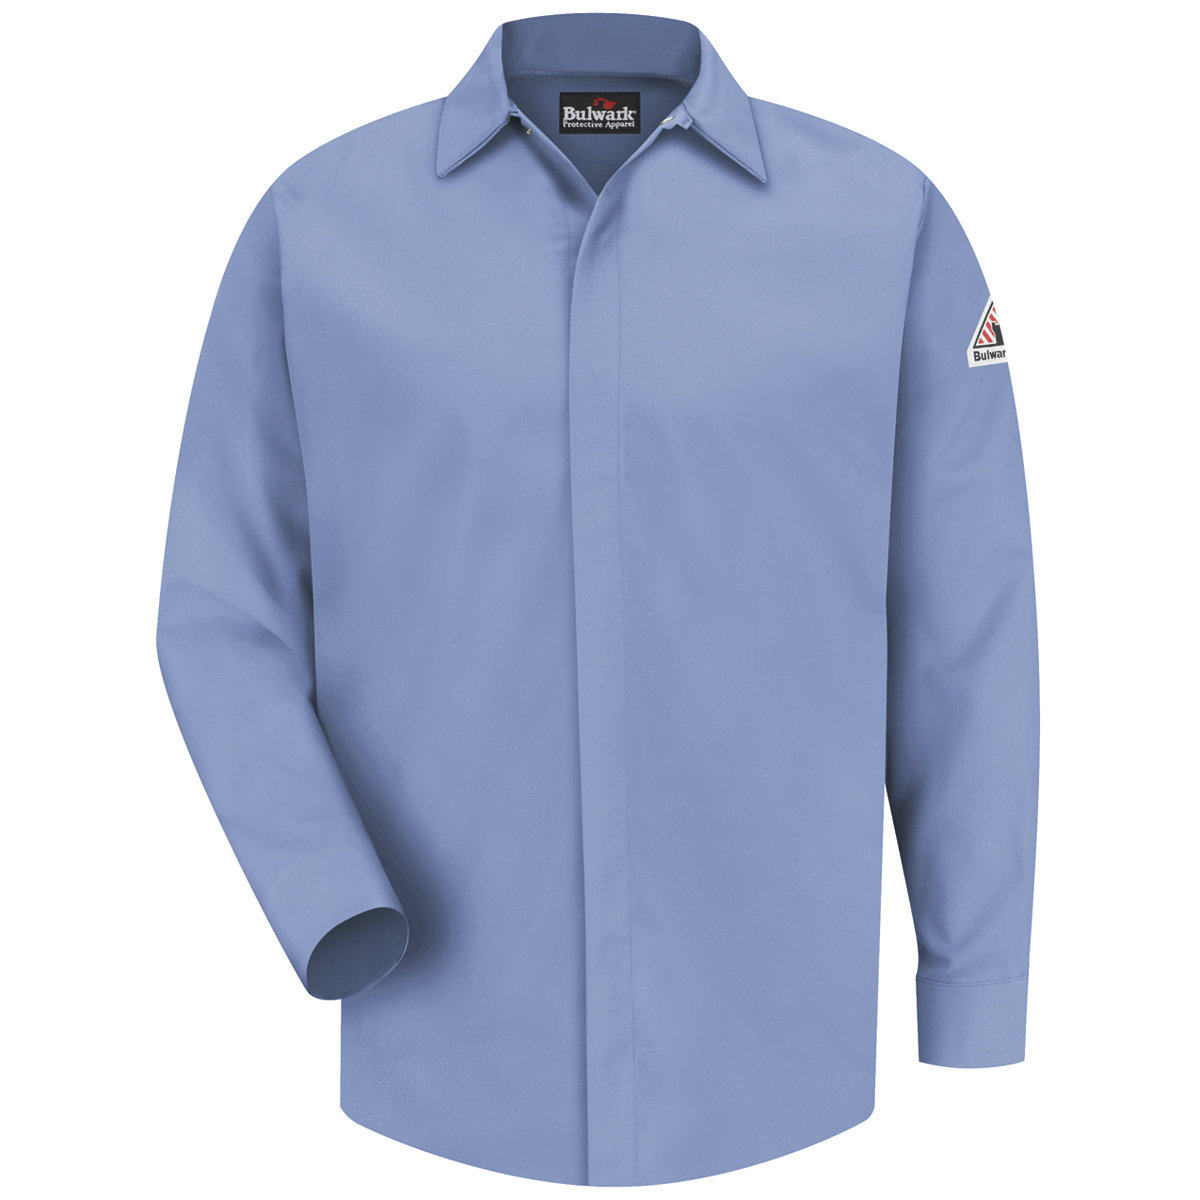 Bulwark® X-Large Tall Light Blue Westex Ultrasoft®/Cotton/Nylon Flame Resistant Work Shirt With Gripper Front Closure